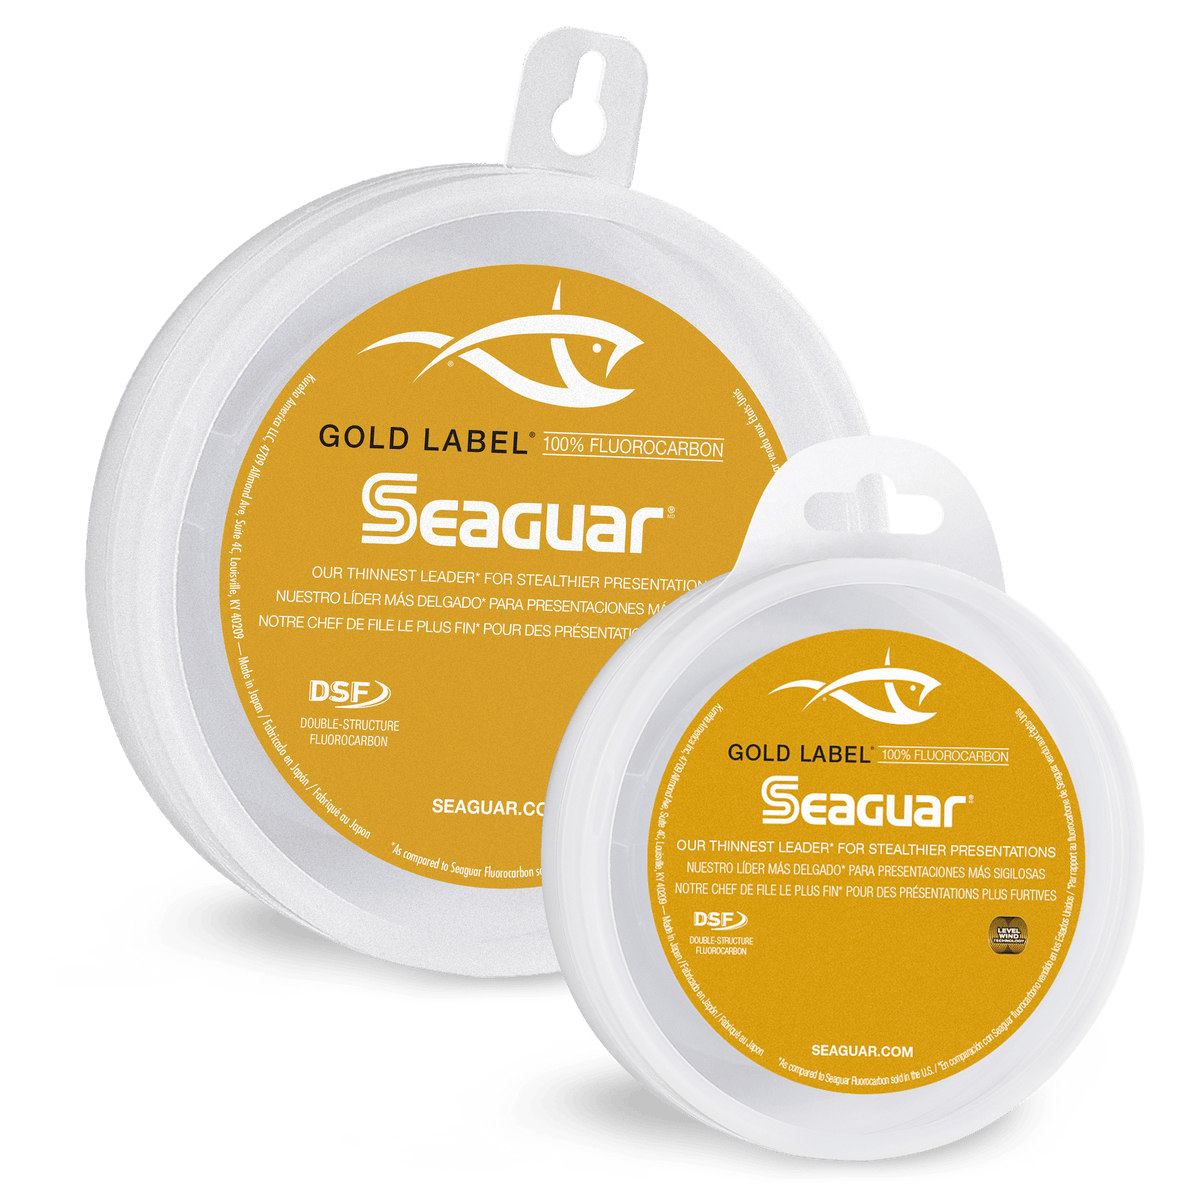 Fish Seaguar - Fluoro Premier or Gold Label? What is your